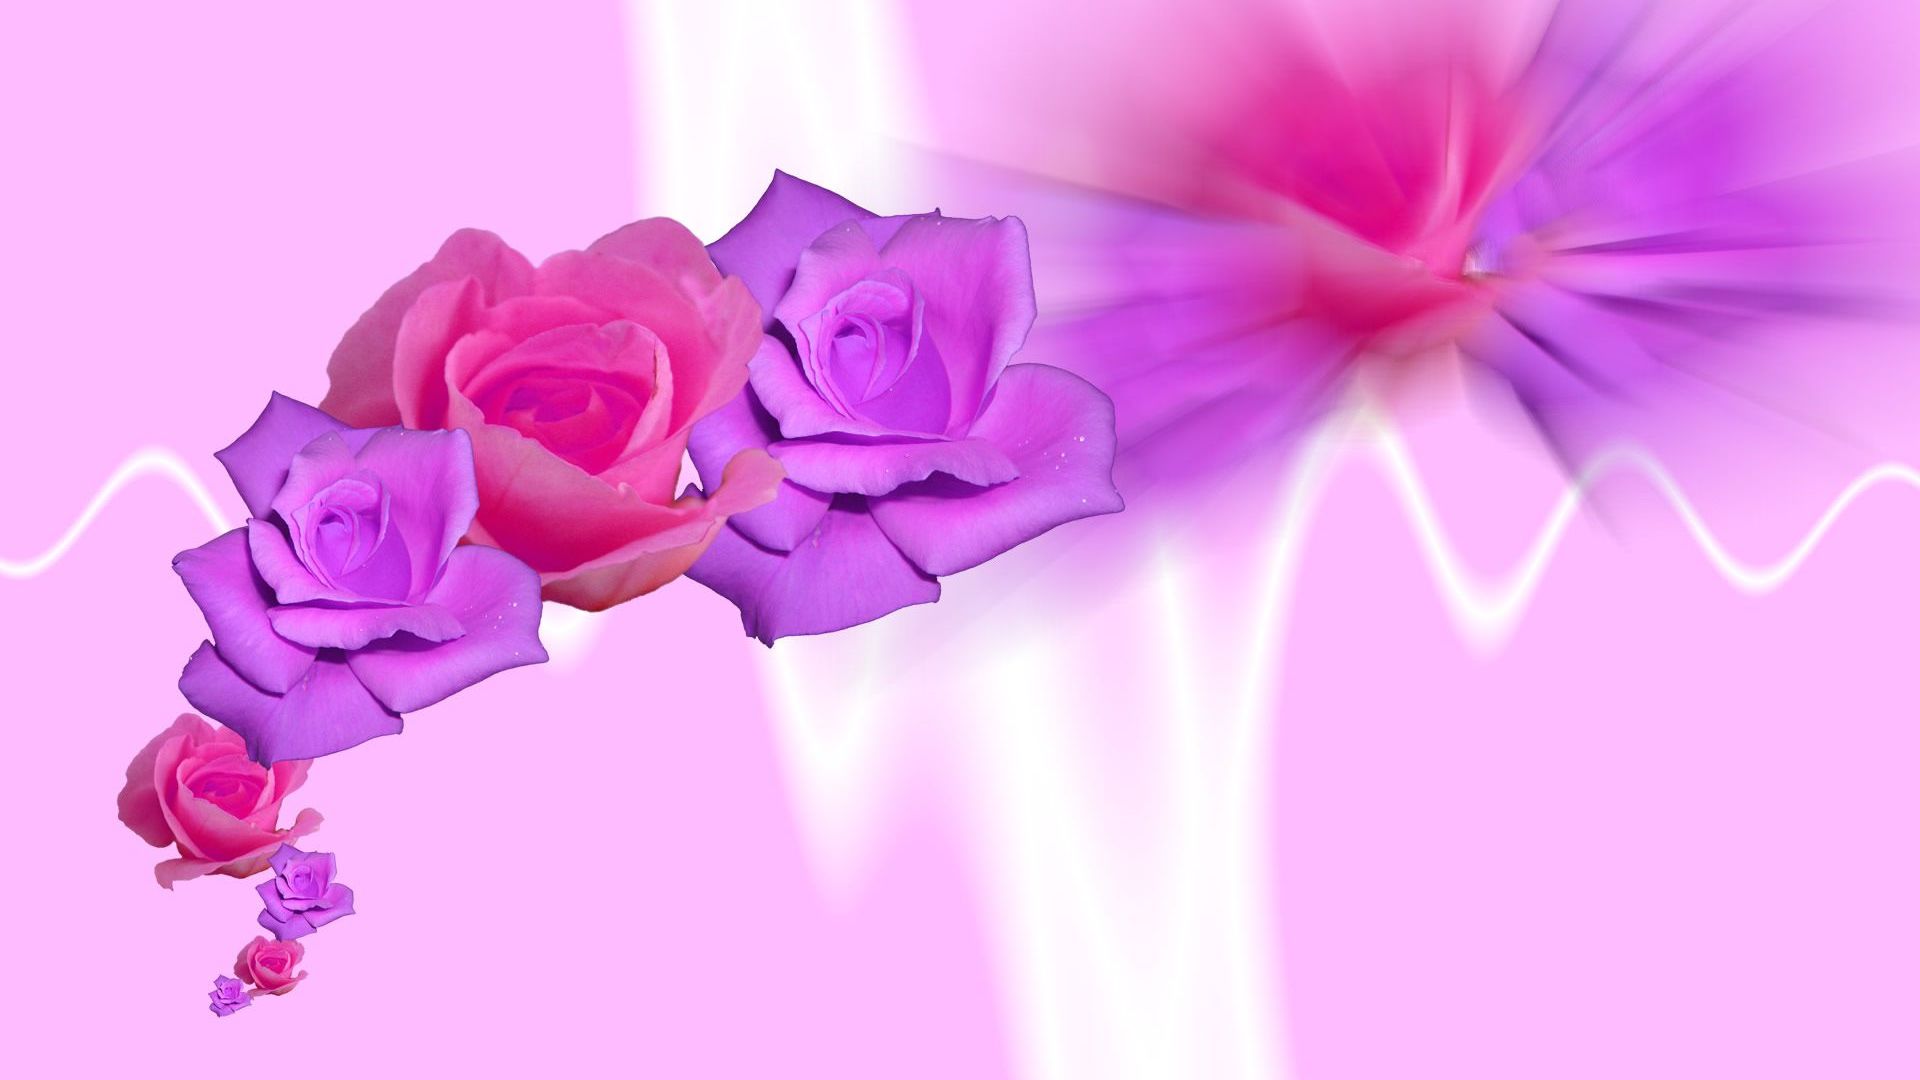 Free download BeautyFul Flowers purple rose wallpapers [2118x1606] for